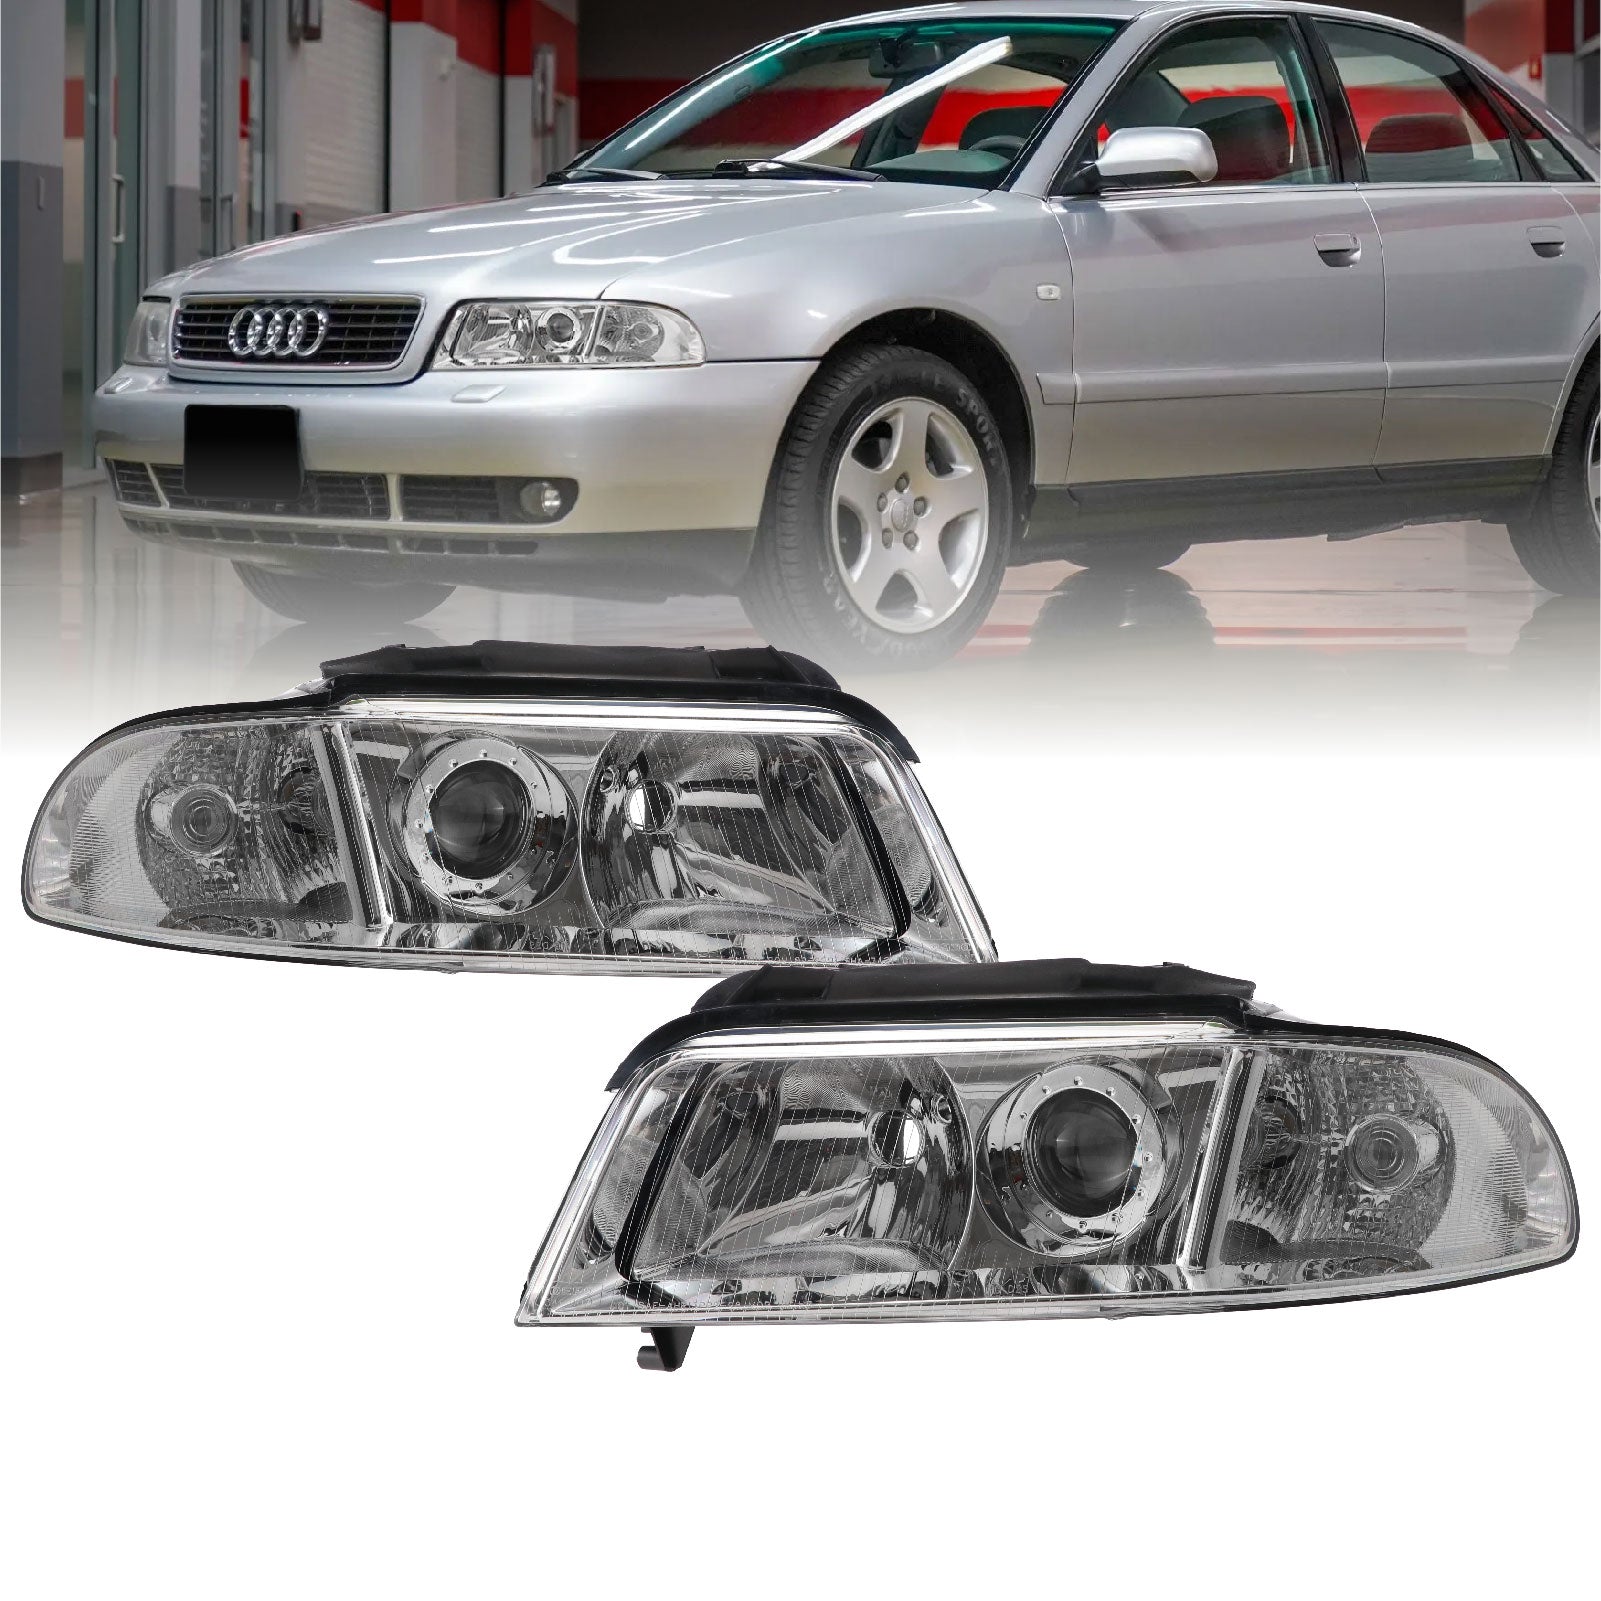 1992-2001 Audi A4 B5.5 / 2000-2002 S4 Euro ECODE Projector